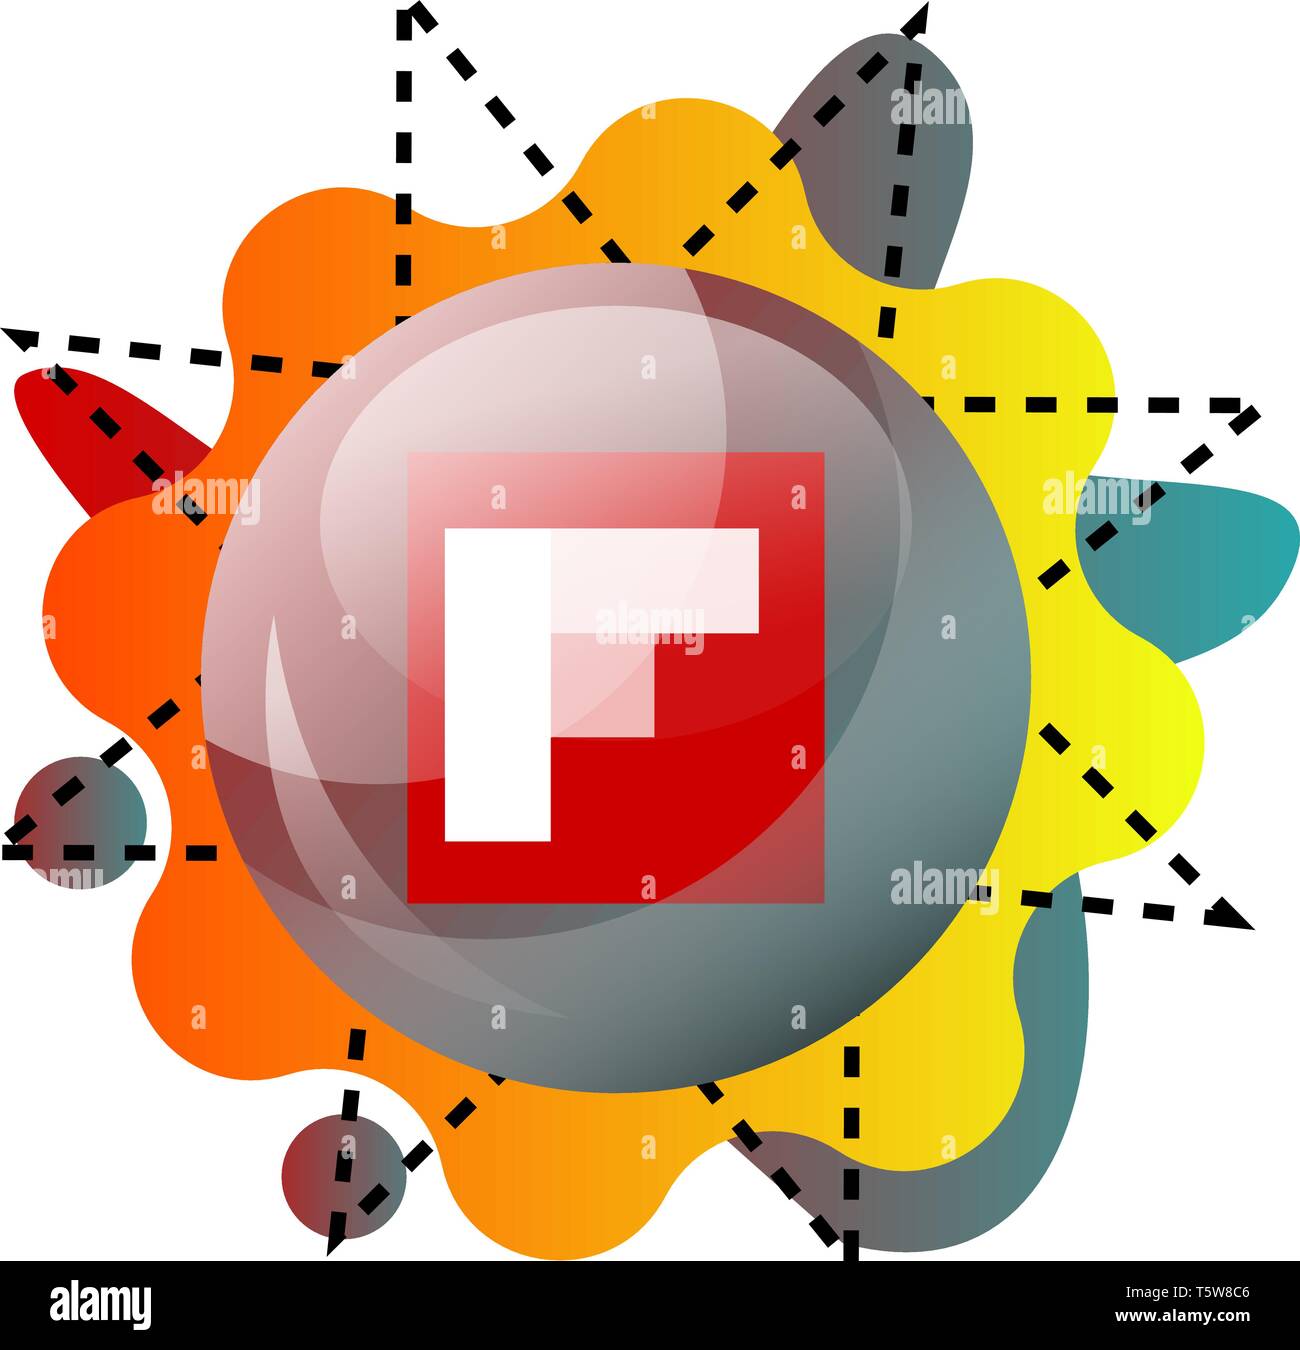 FlipBoard logo inside a bubble with colorful shapes vector illustration on a white background Stock Vector